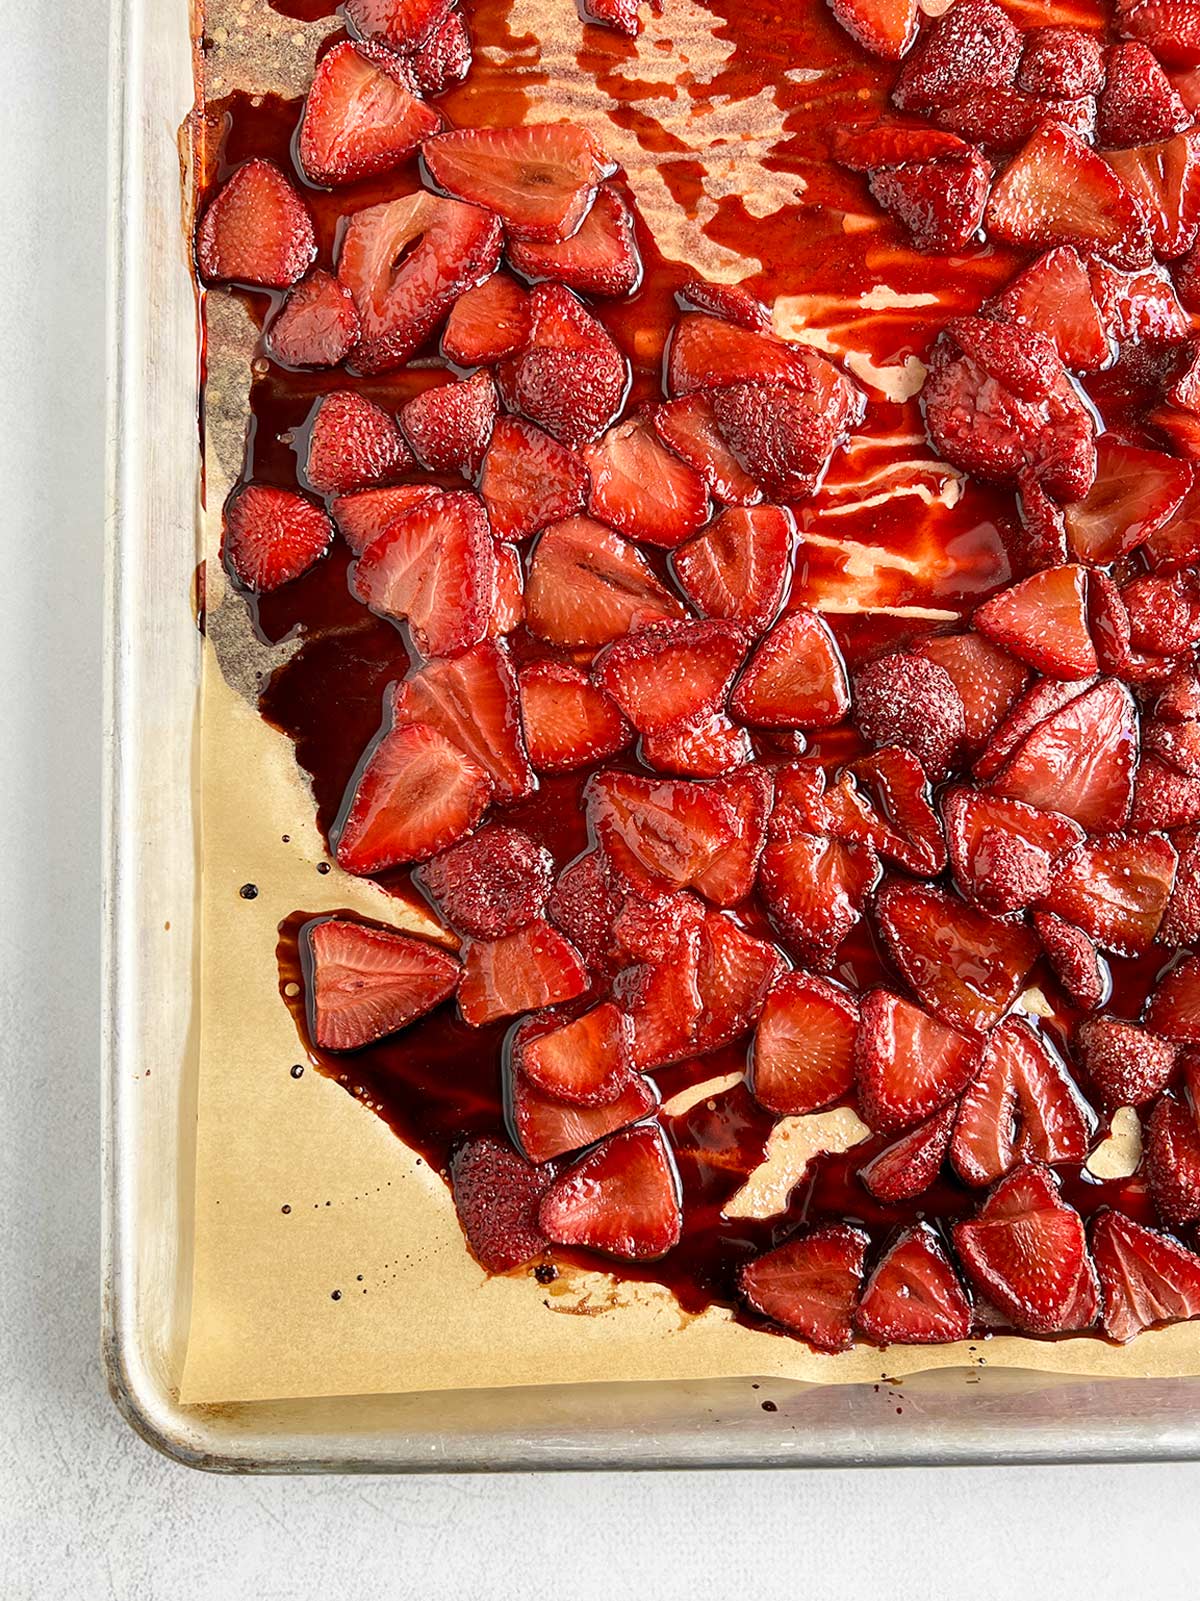 Roasted strawberries on parchment-lined baking sheet.